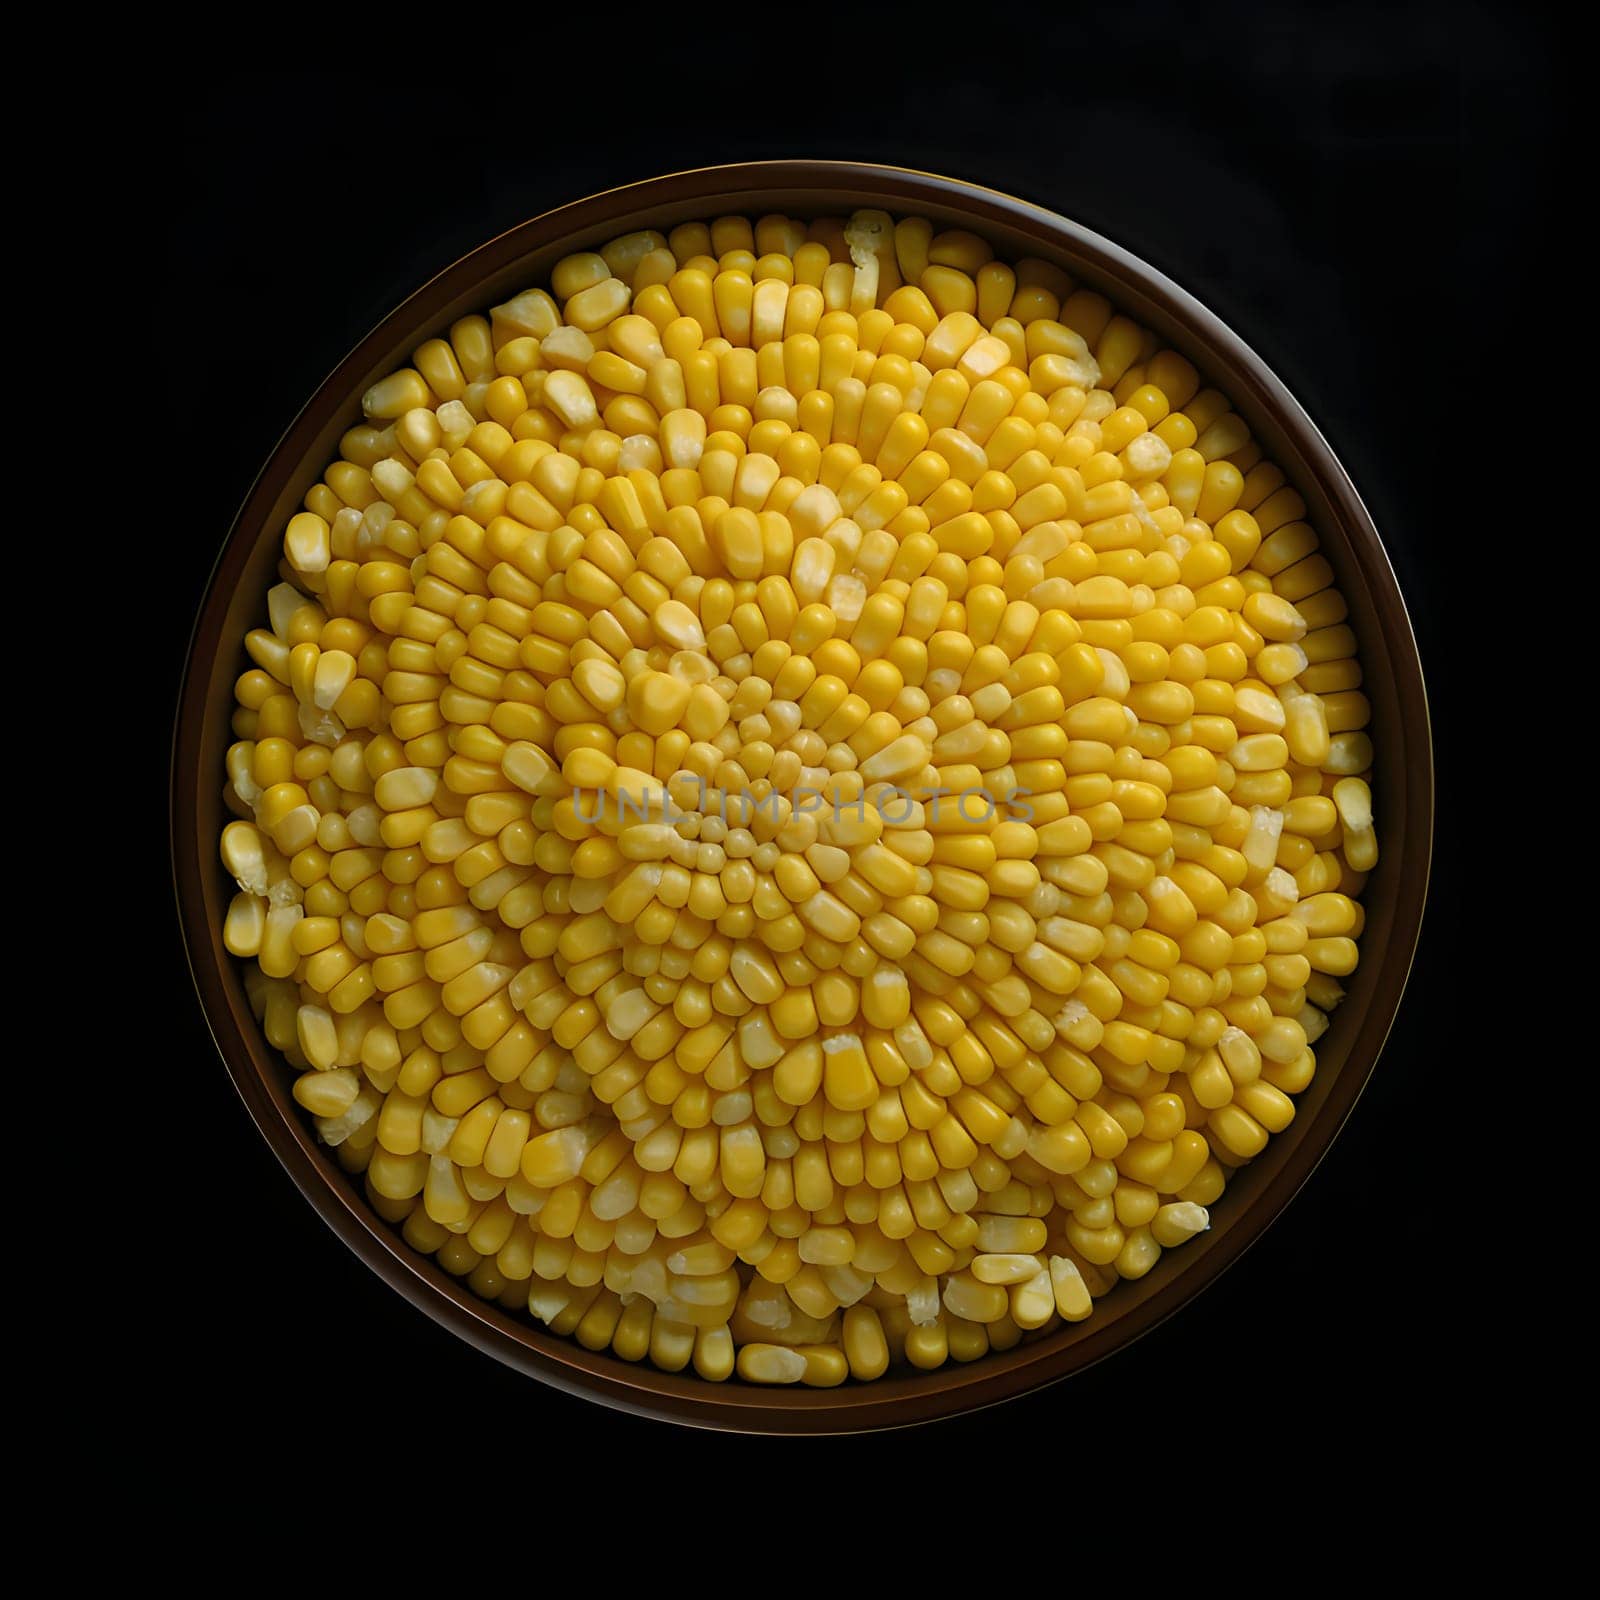 View from above of a bowl full of yellow corn kernels isolated on a black background. Corn as a dish of thanksgiving for the harvest. An atmosphere of joy and celebration.